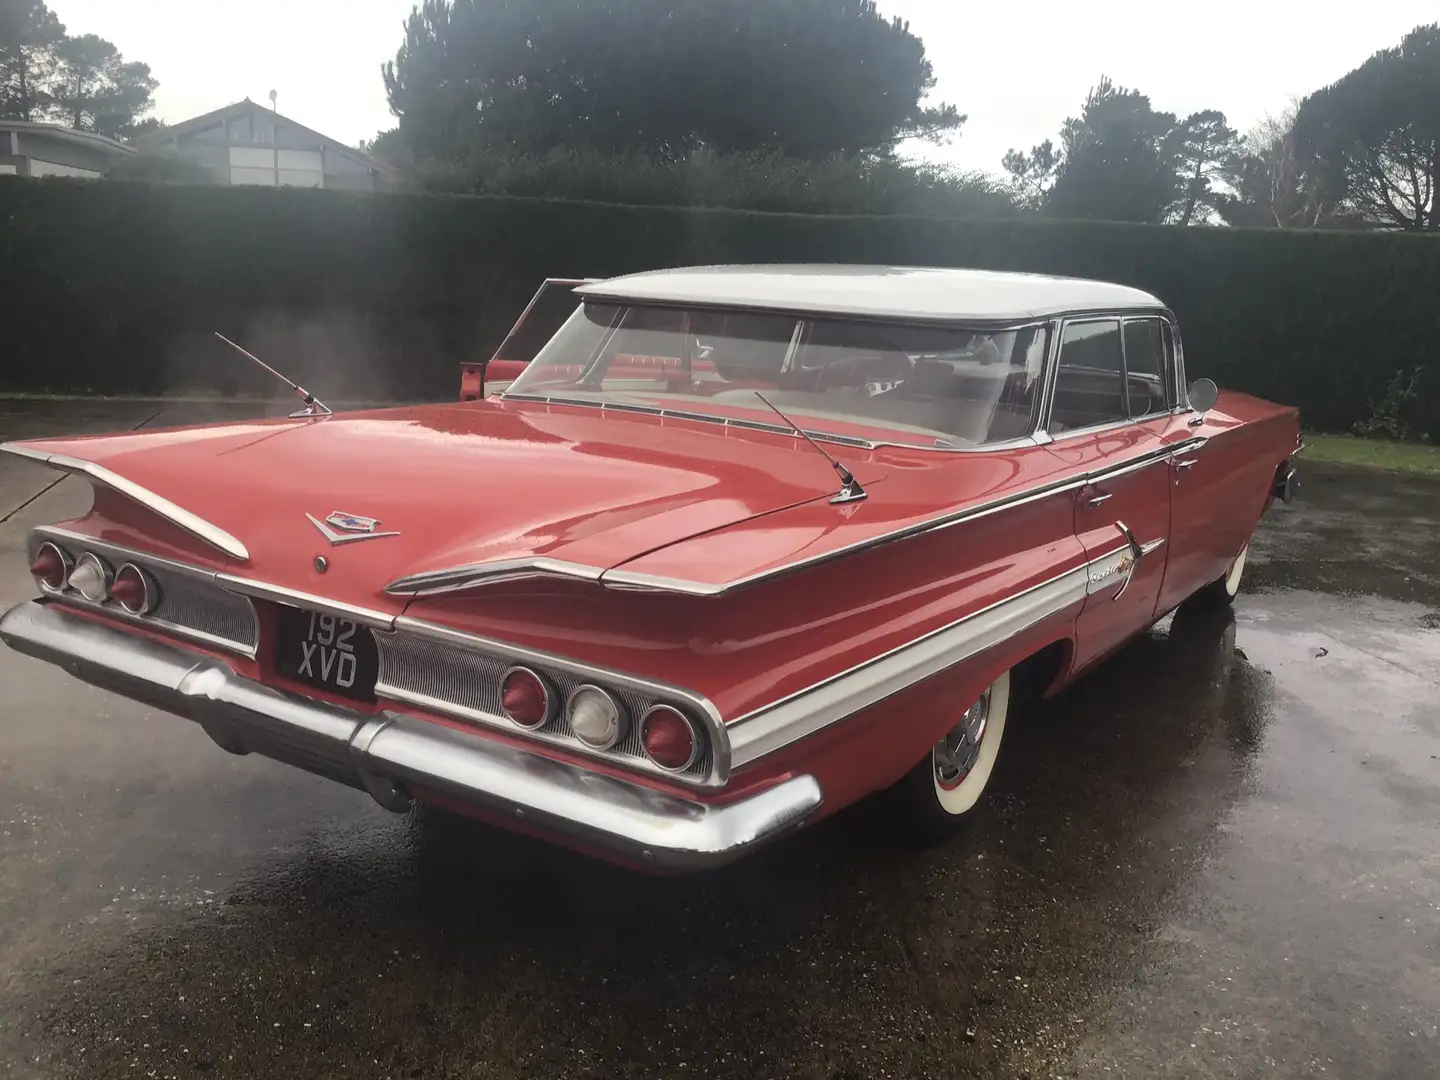 Chevrolet Impala automatic, power steering, working aircon, superb Rot - 1